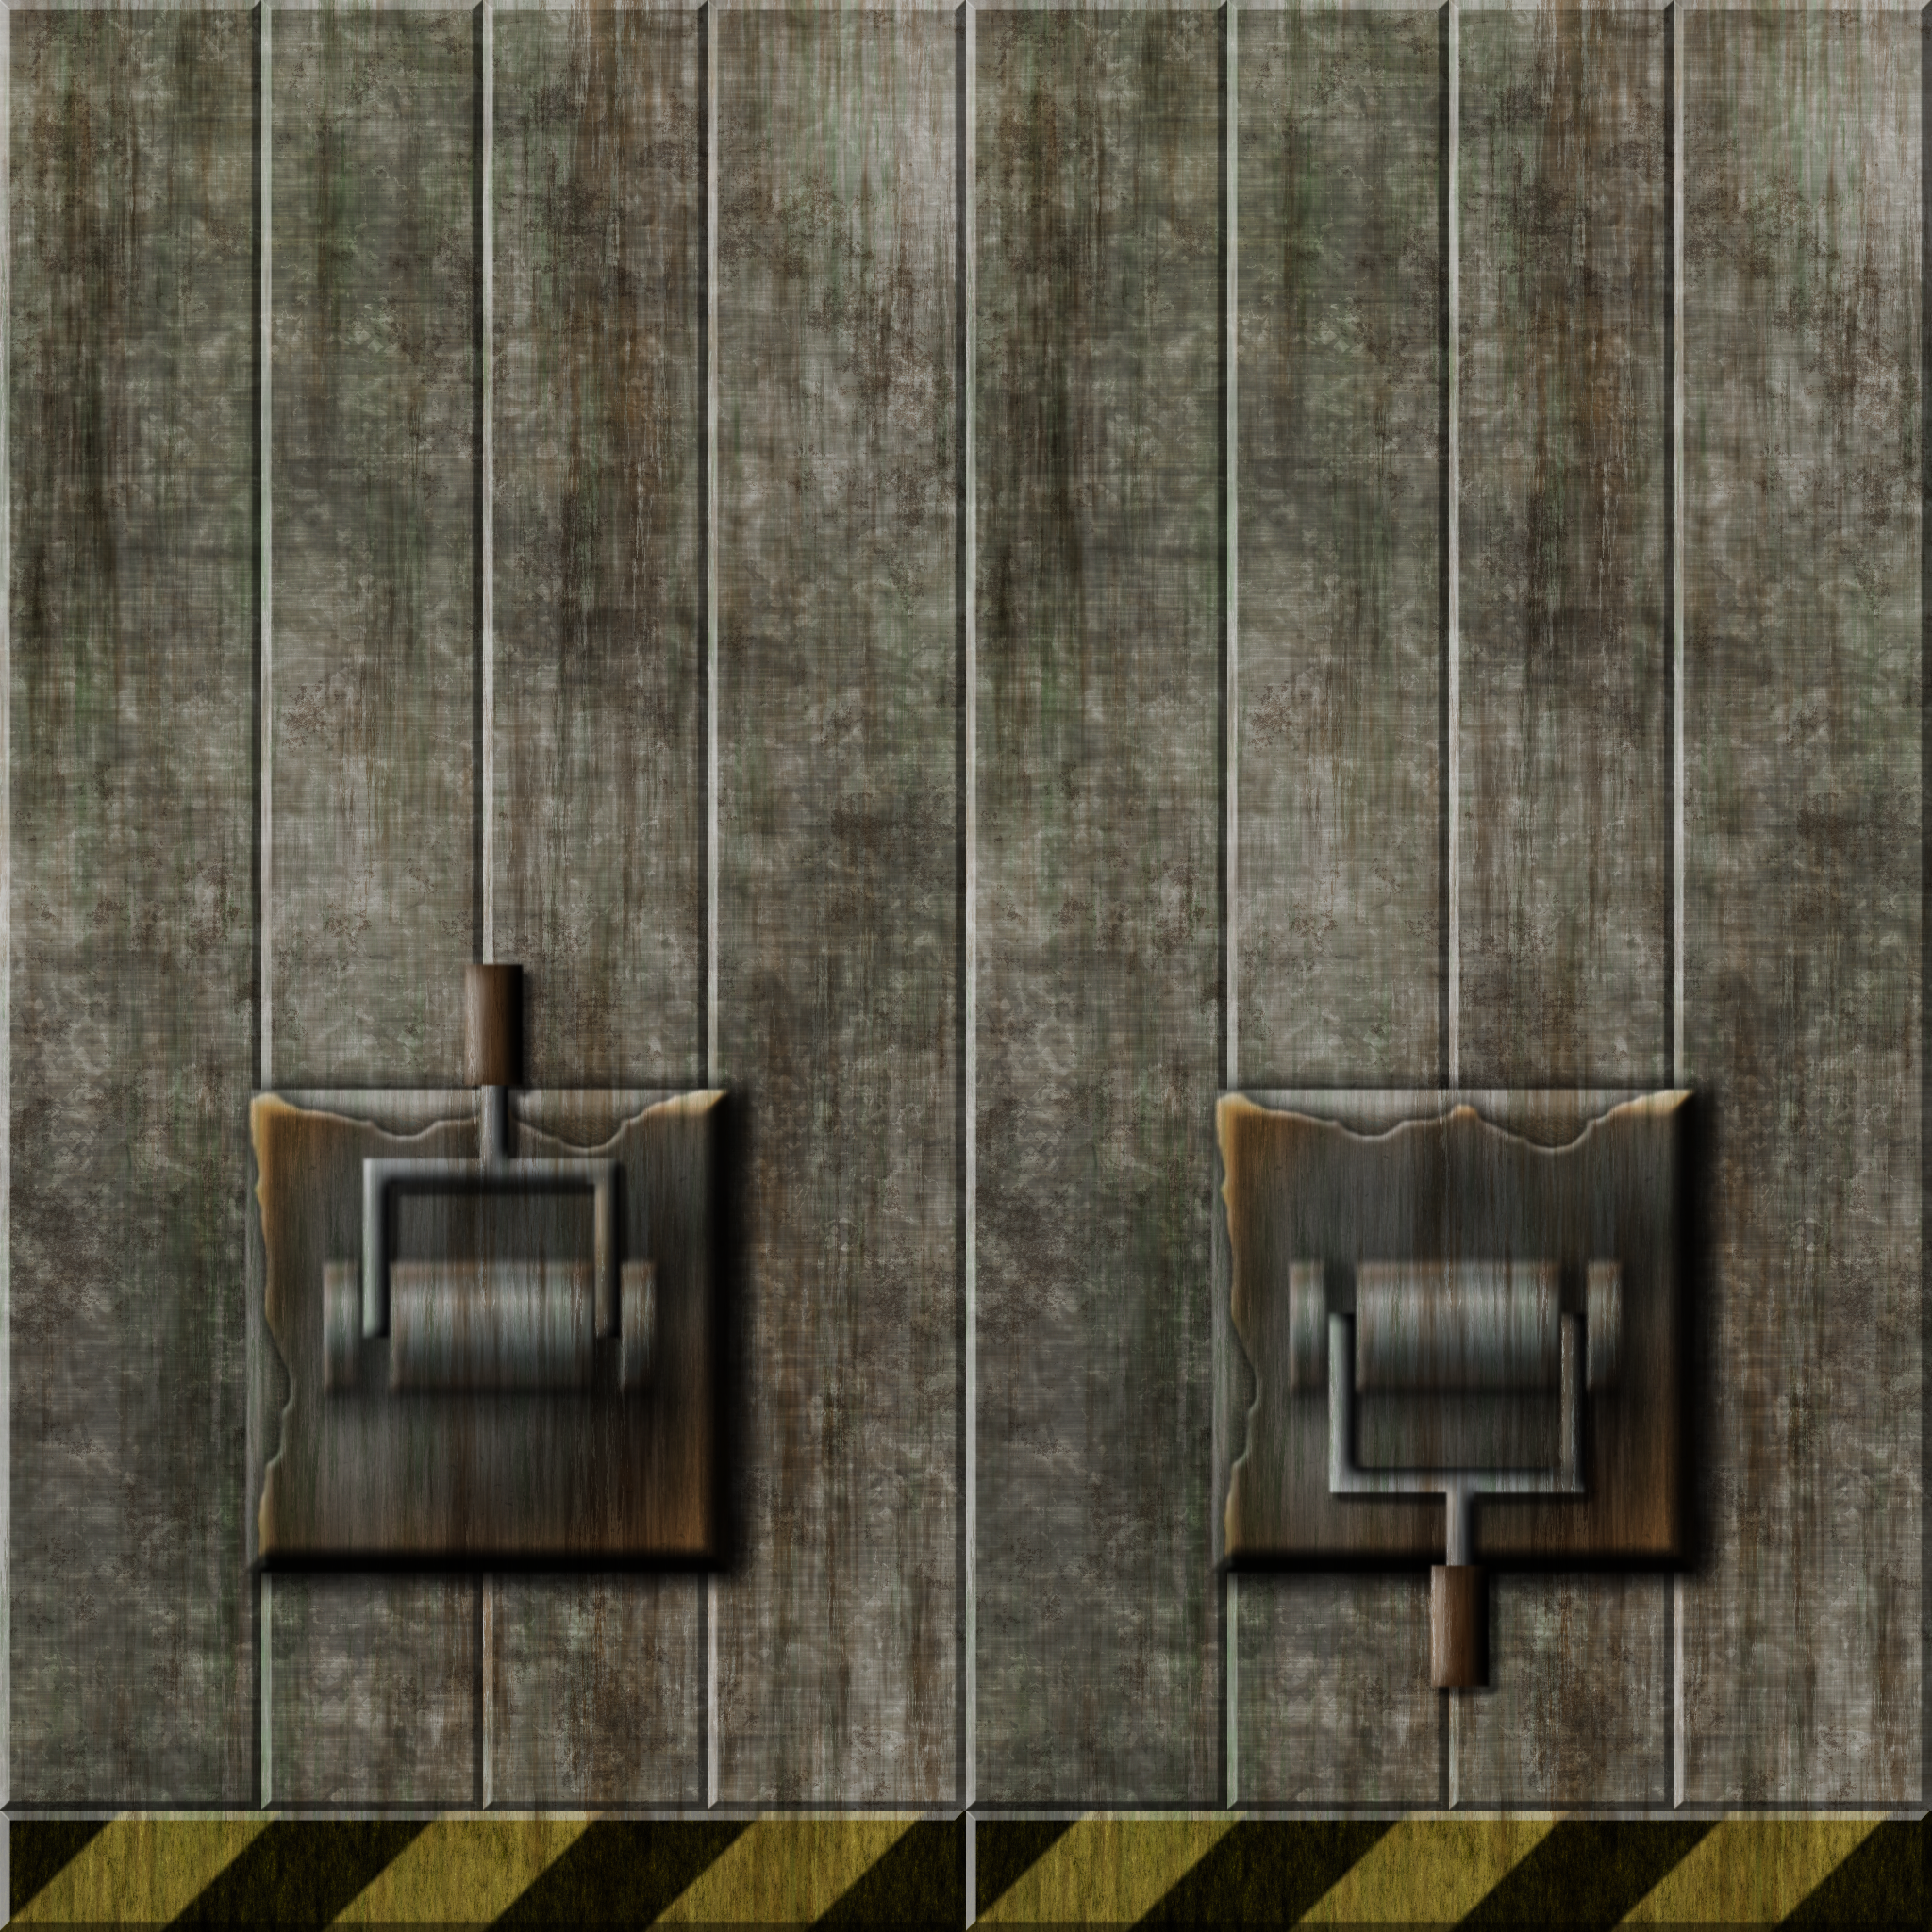 cement_switch_remake_by_hoover1979-dar4ngk.png